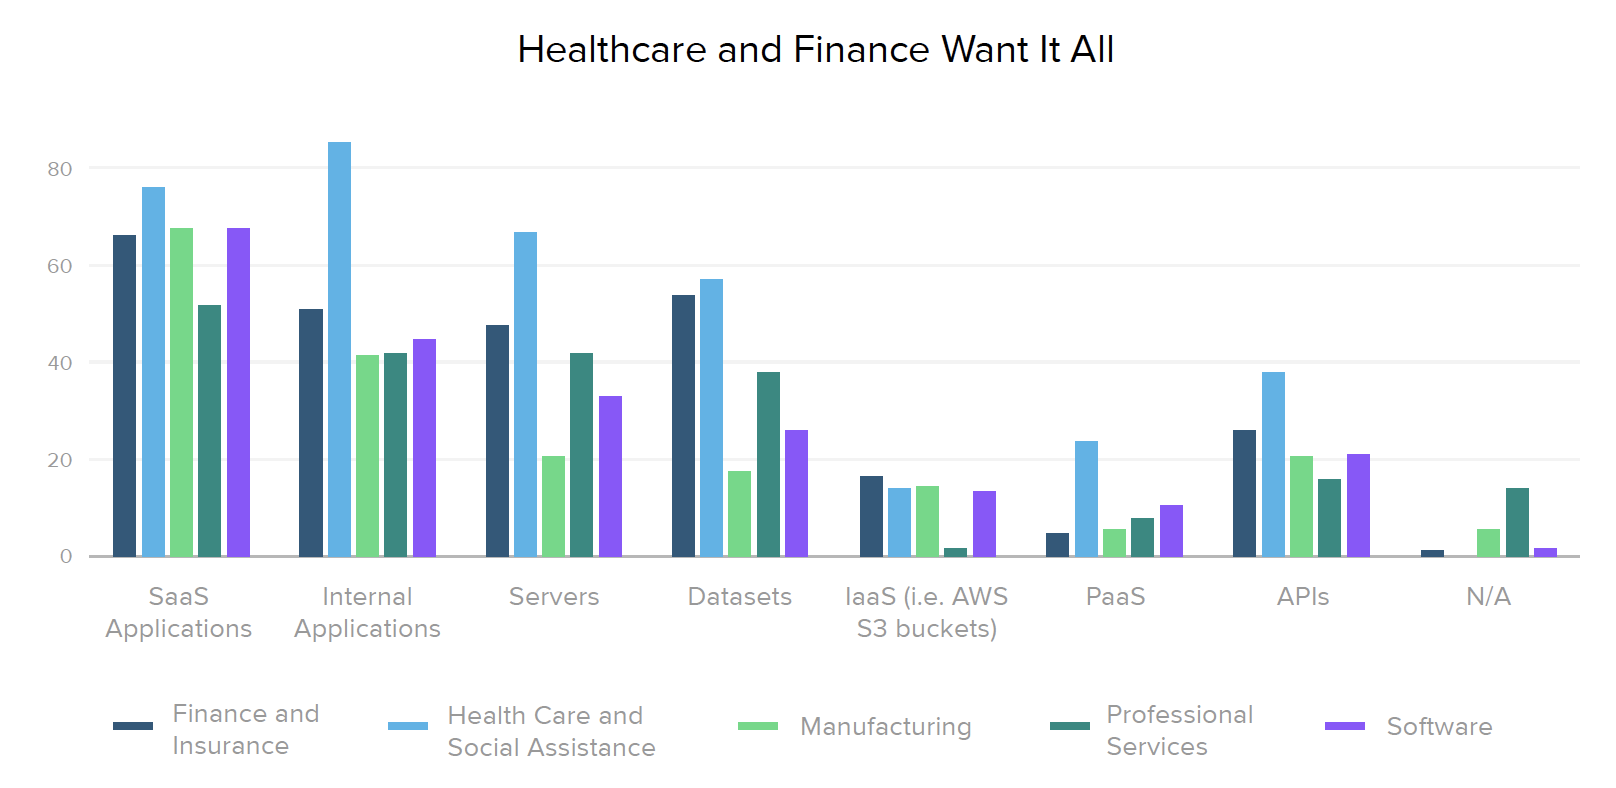 Healthcare and Finance Want It All